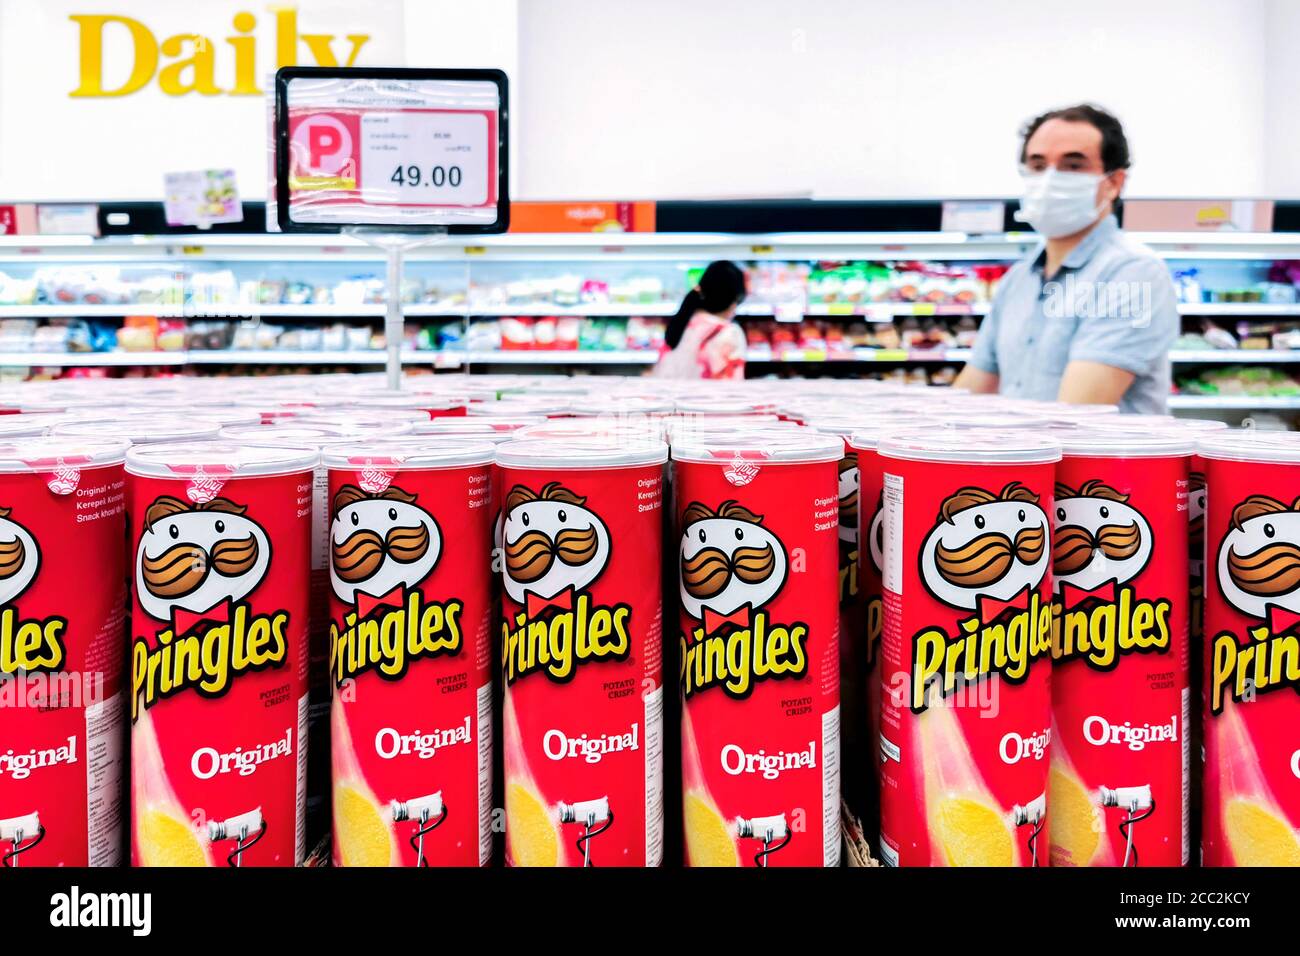 Bangkok, Thailand - August 10, 2020 : Pringles product in marketing promotion sale display on  shelf with customer looking and shopping at supermarket Stock Photo